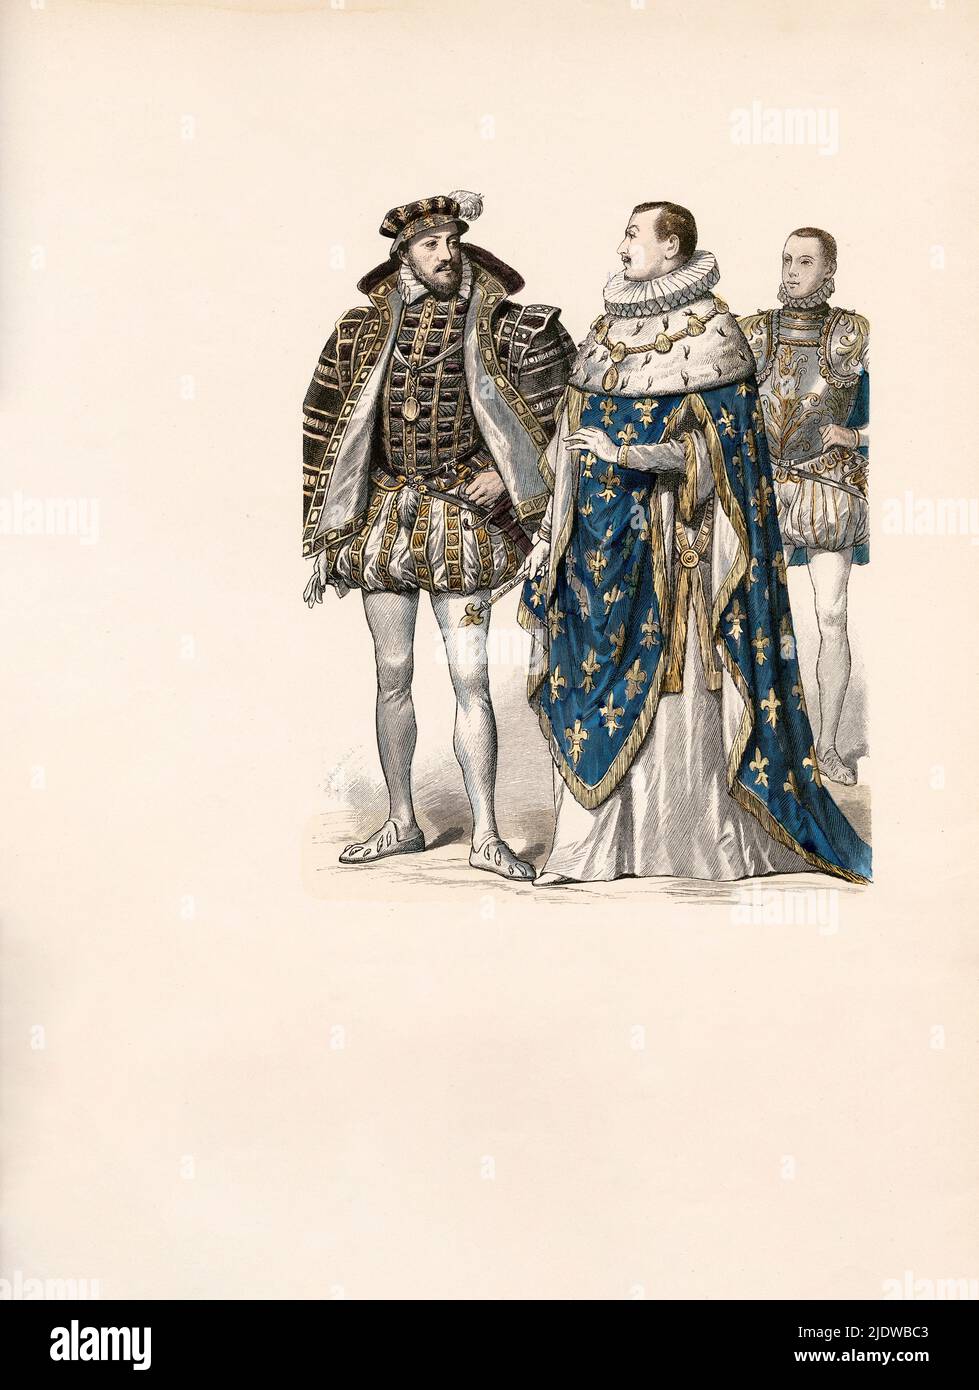 Antoine Bourbon, King of Navarre, Father of Henry IV (1518-1562), Charles IX in Full Regalia, Francis II, France, 16th Century, Illustration, The History of Costume, Braun & Schneider, Munich, Germany, 1861-1880 Stock Photo